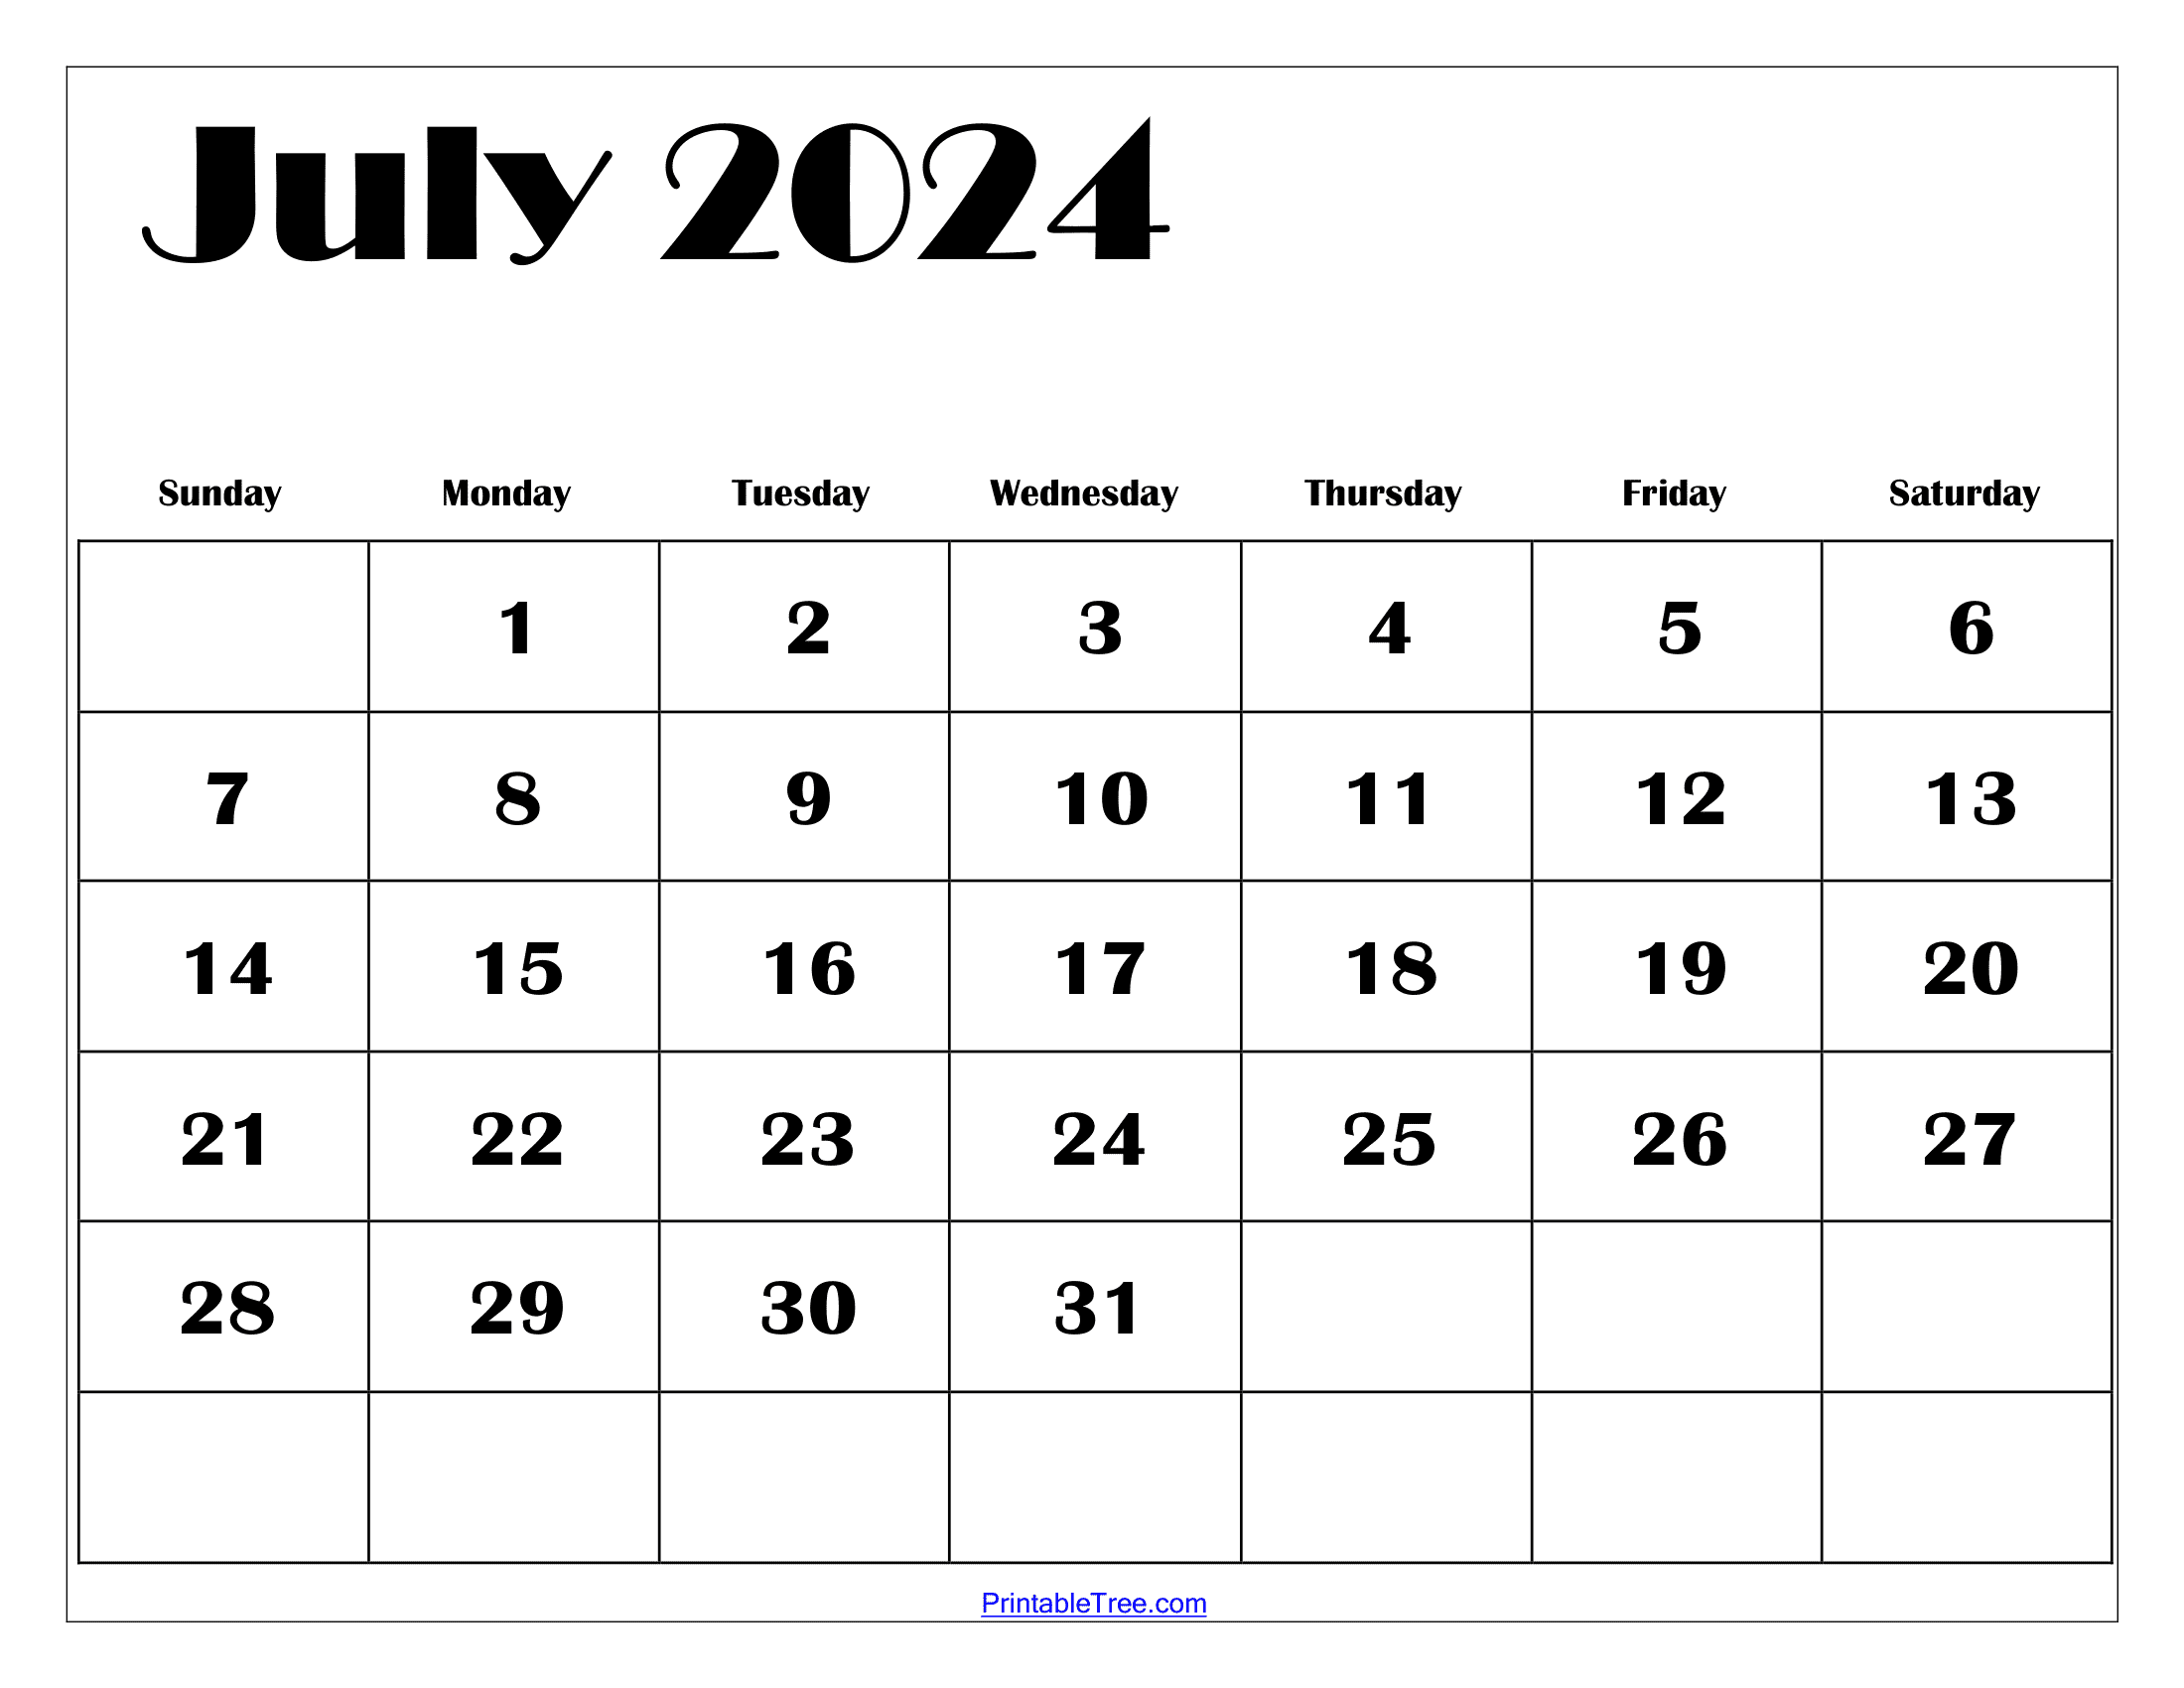 July 2024 Calendar Printable Pdf With Holidays Free Template throughout Free Printable Blank Calendar July 2024